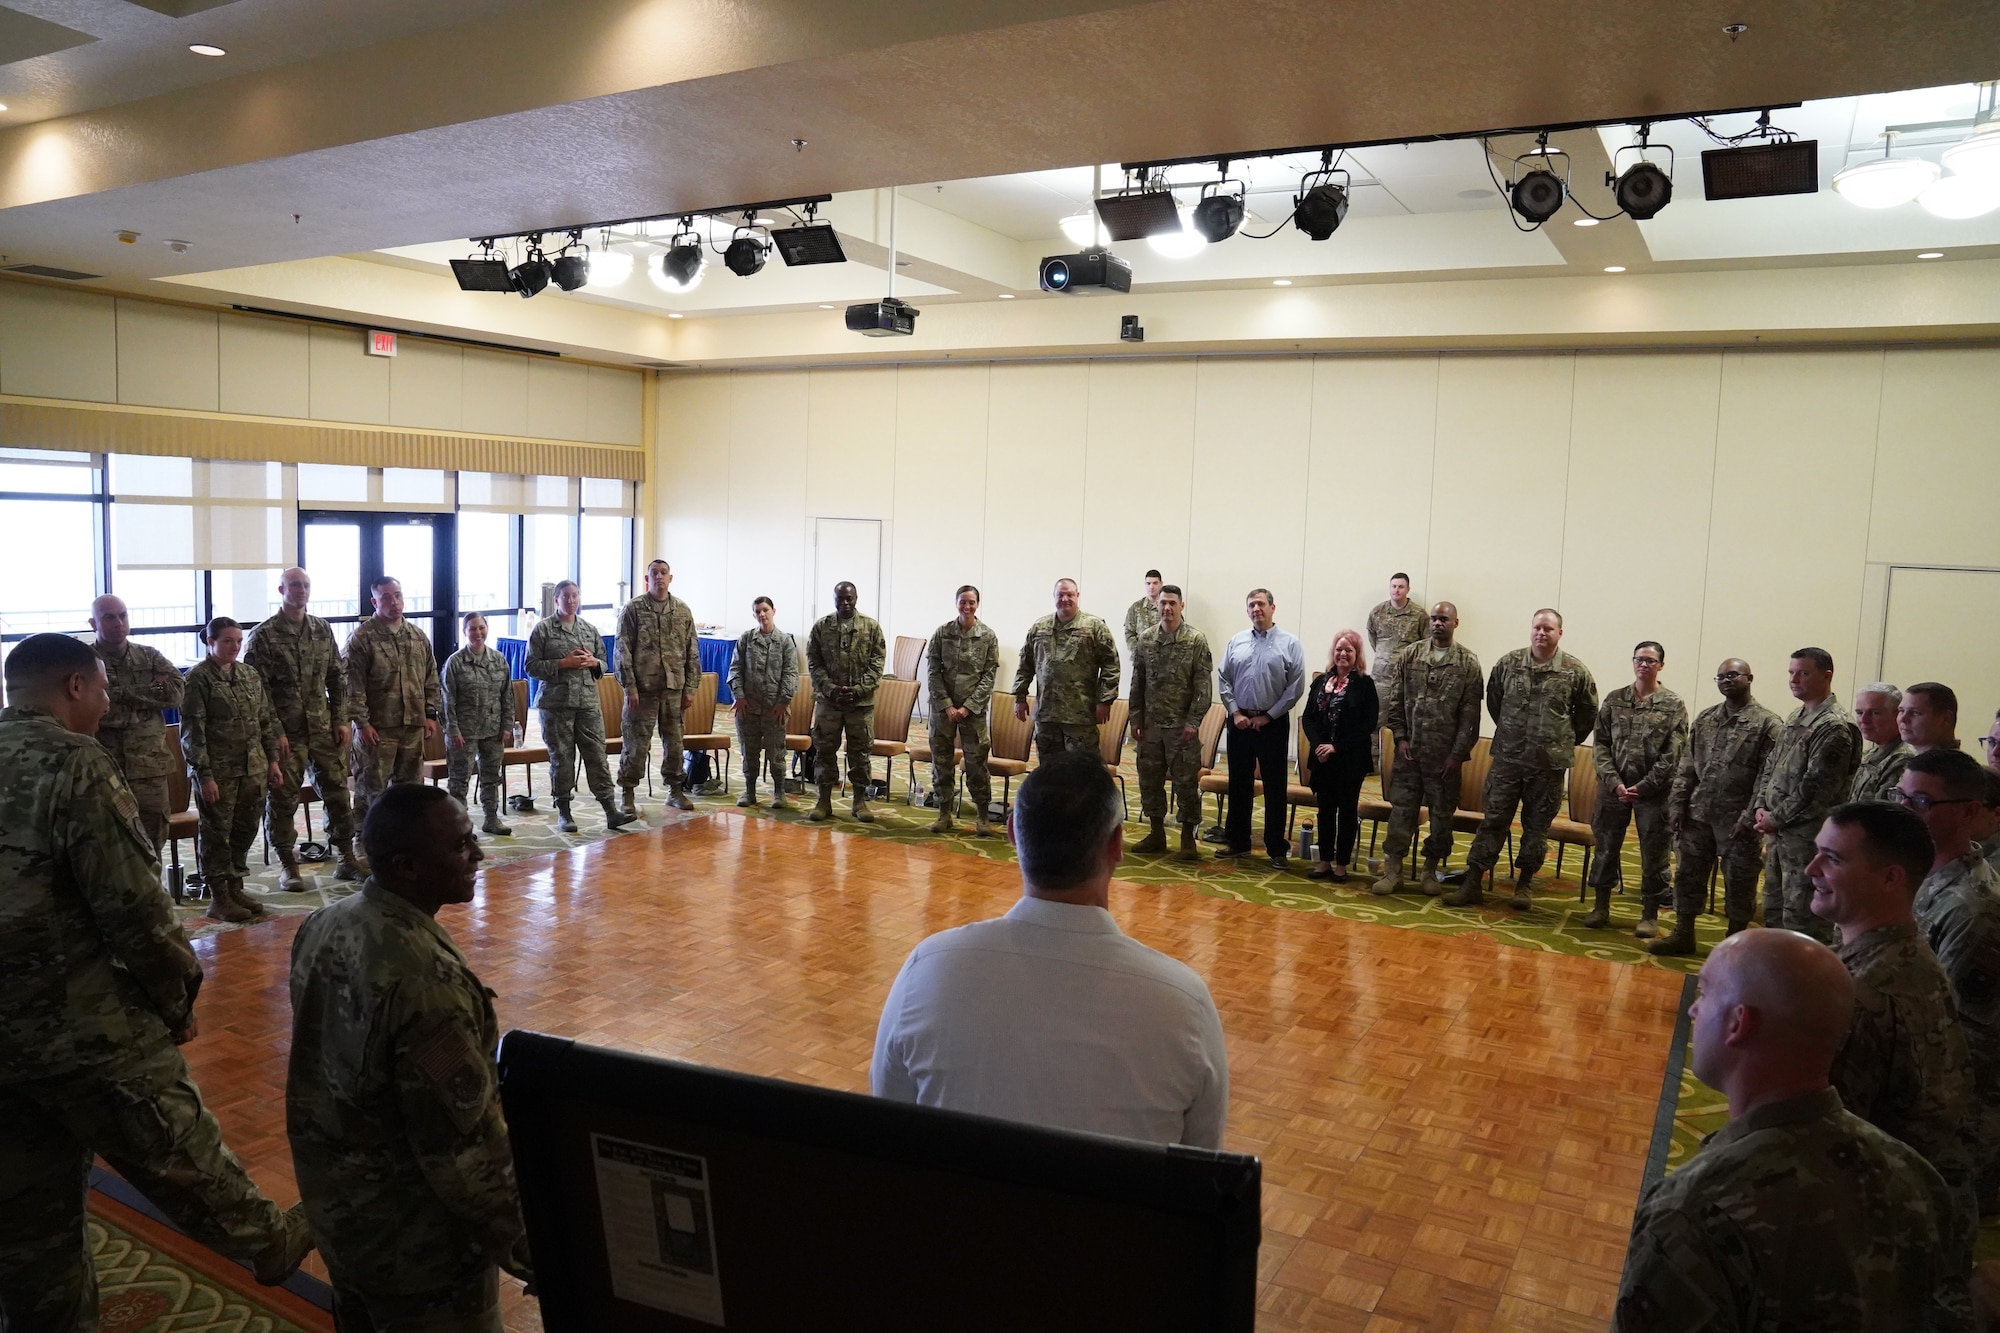 U.S. Air Force Airmen gather for an 'Improv to Improve' course in the Bay Breeze Event Center at Keesler Air Force Base, Mississippi, Dec. 10, 2019. Improv to Improve is an improvisation comedy resiliency class that engages military members in a safe interactive learning environment. The purpose of the class is to help combat life stress and adversity in an unconventional way. (U.S. Air Force photo by Airman 1st Class Spencer Tobler)